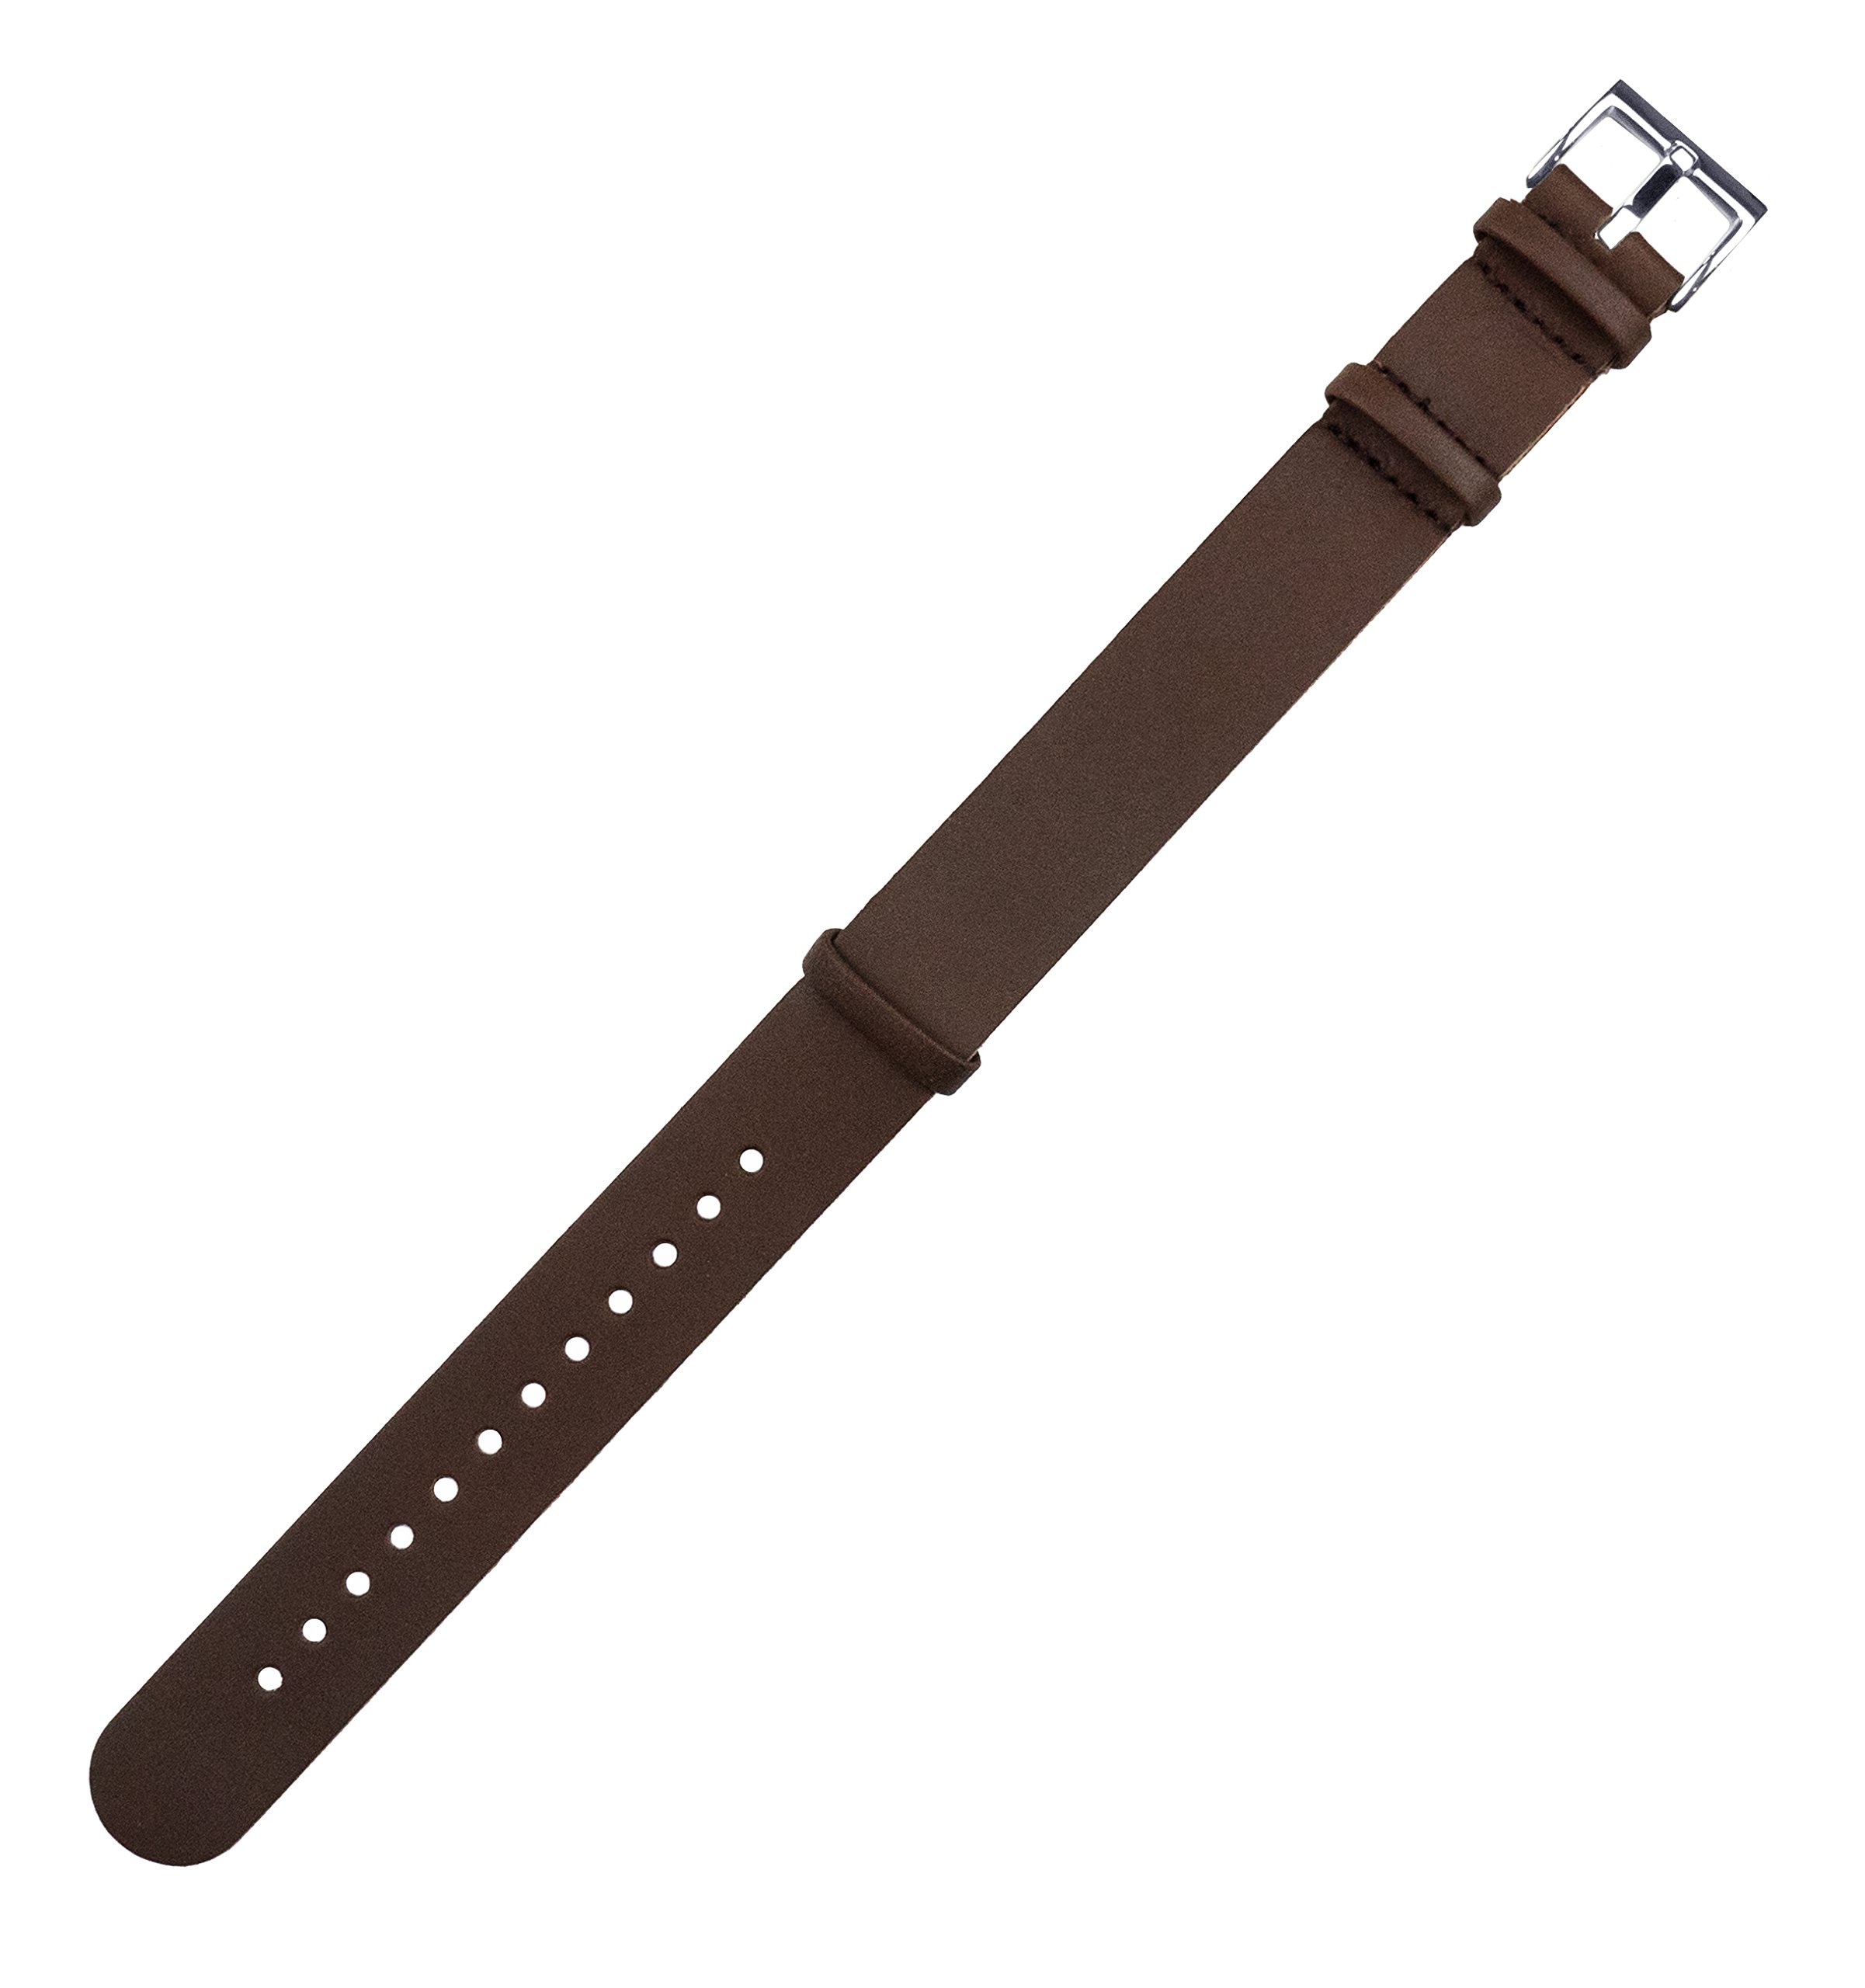 BARTON Leather NATO® Style Watch Straps - Choose Color, Length & Width - 18mm, 20mm, 22mm, 24mm Bands